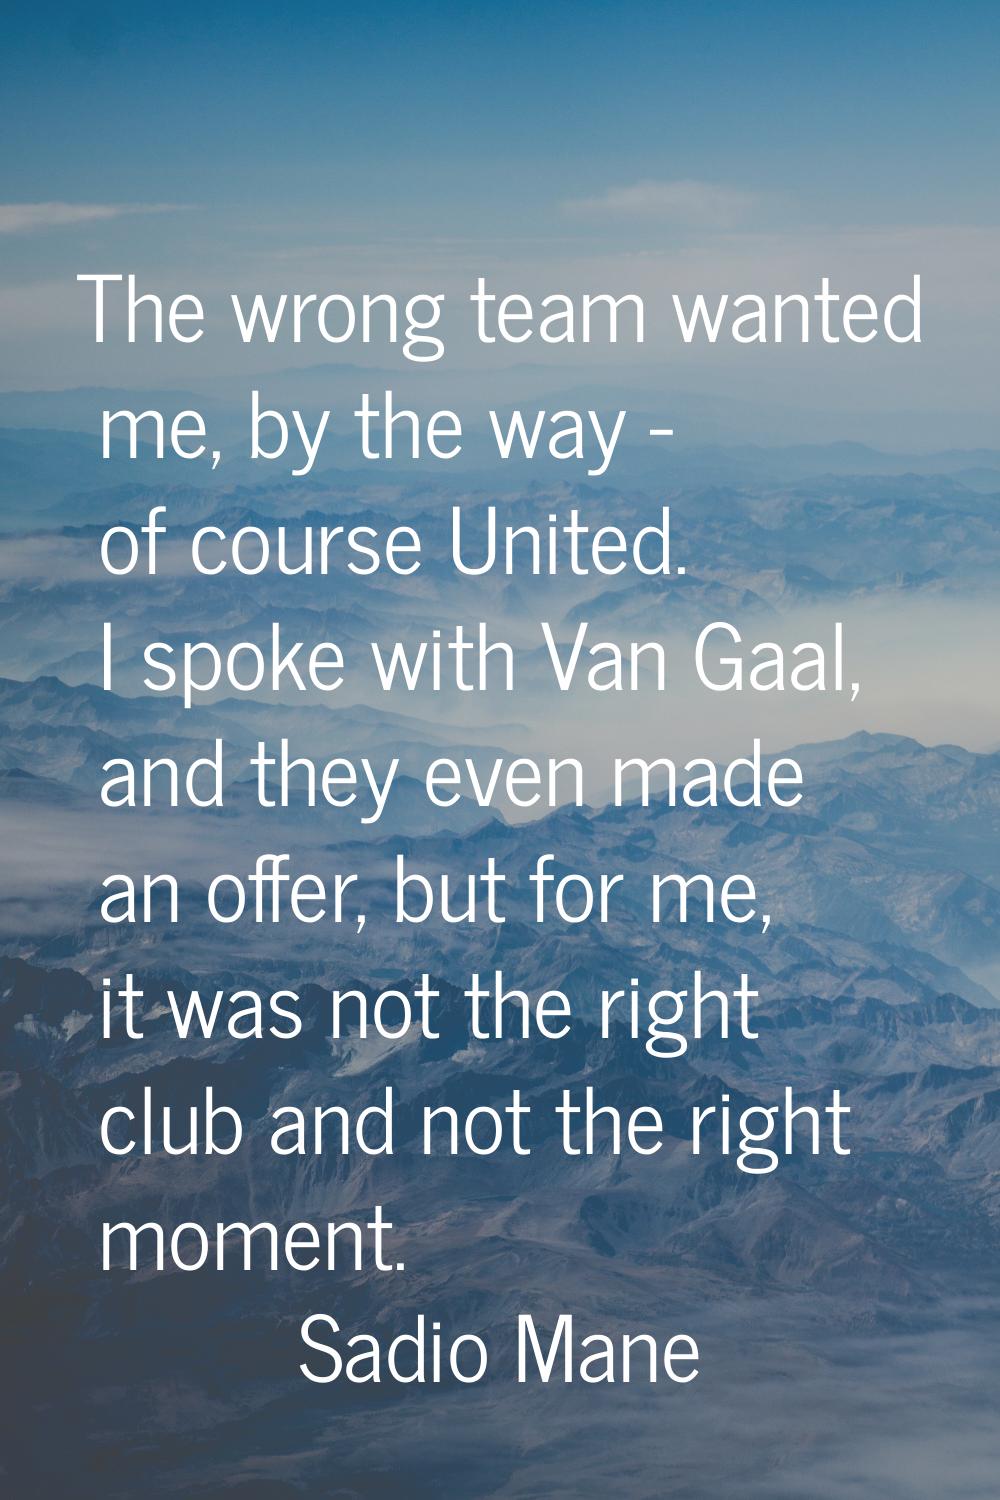 The wrong team wanted me, by the way - of course United. I spoke with Van Gaal, and they even made 